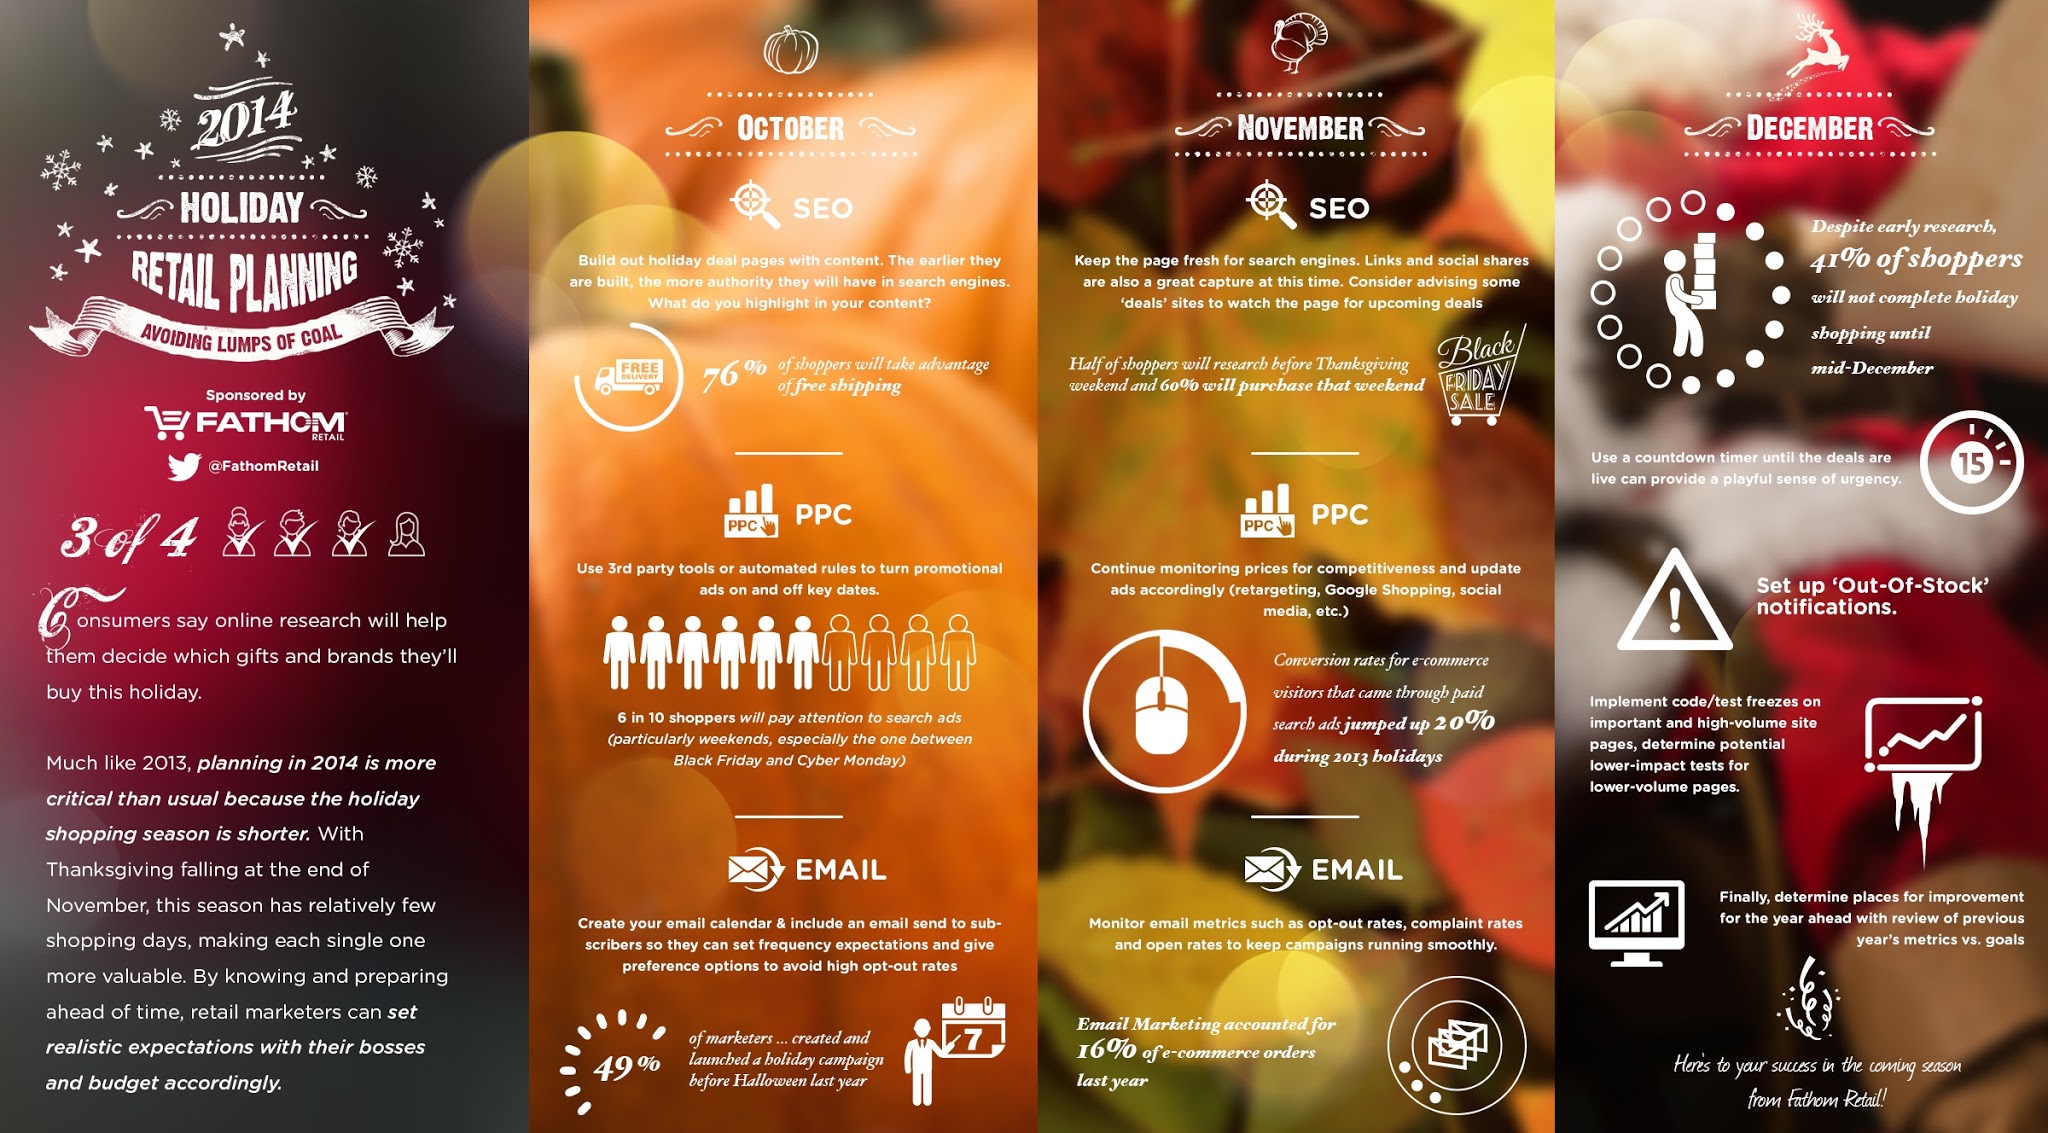 Holiday Marketing Trends - Infographic #SEO #PPC #Email